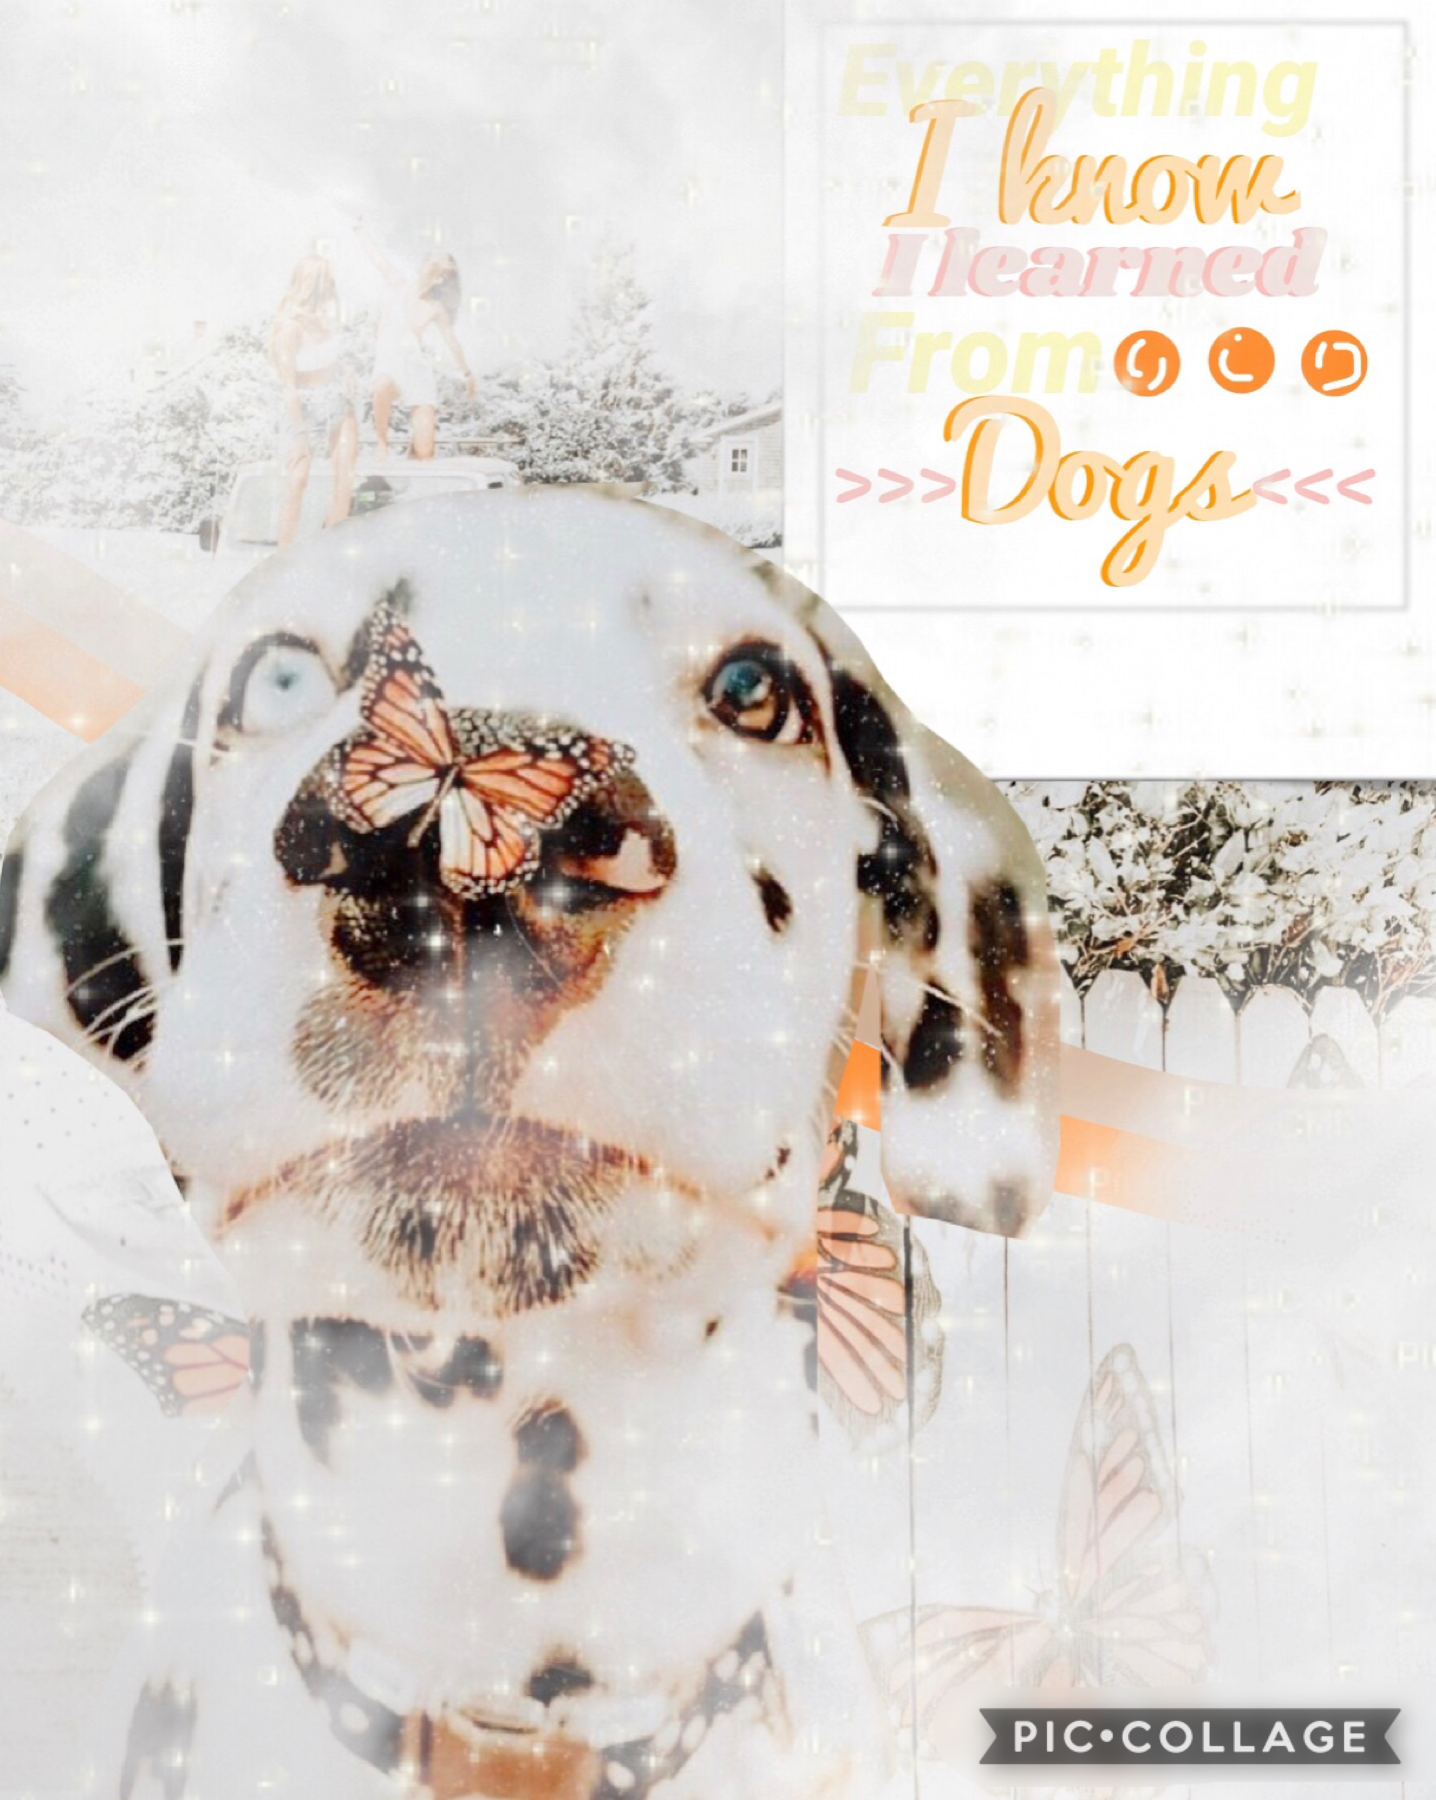 4/28/20
I always do people😆 so here’s a dog themed collage!!:)